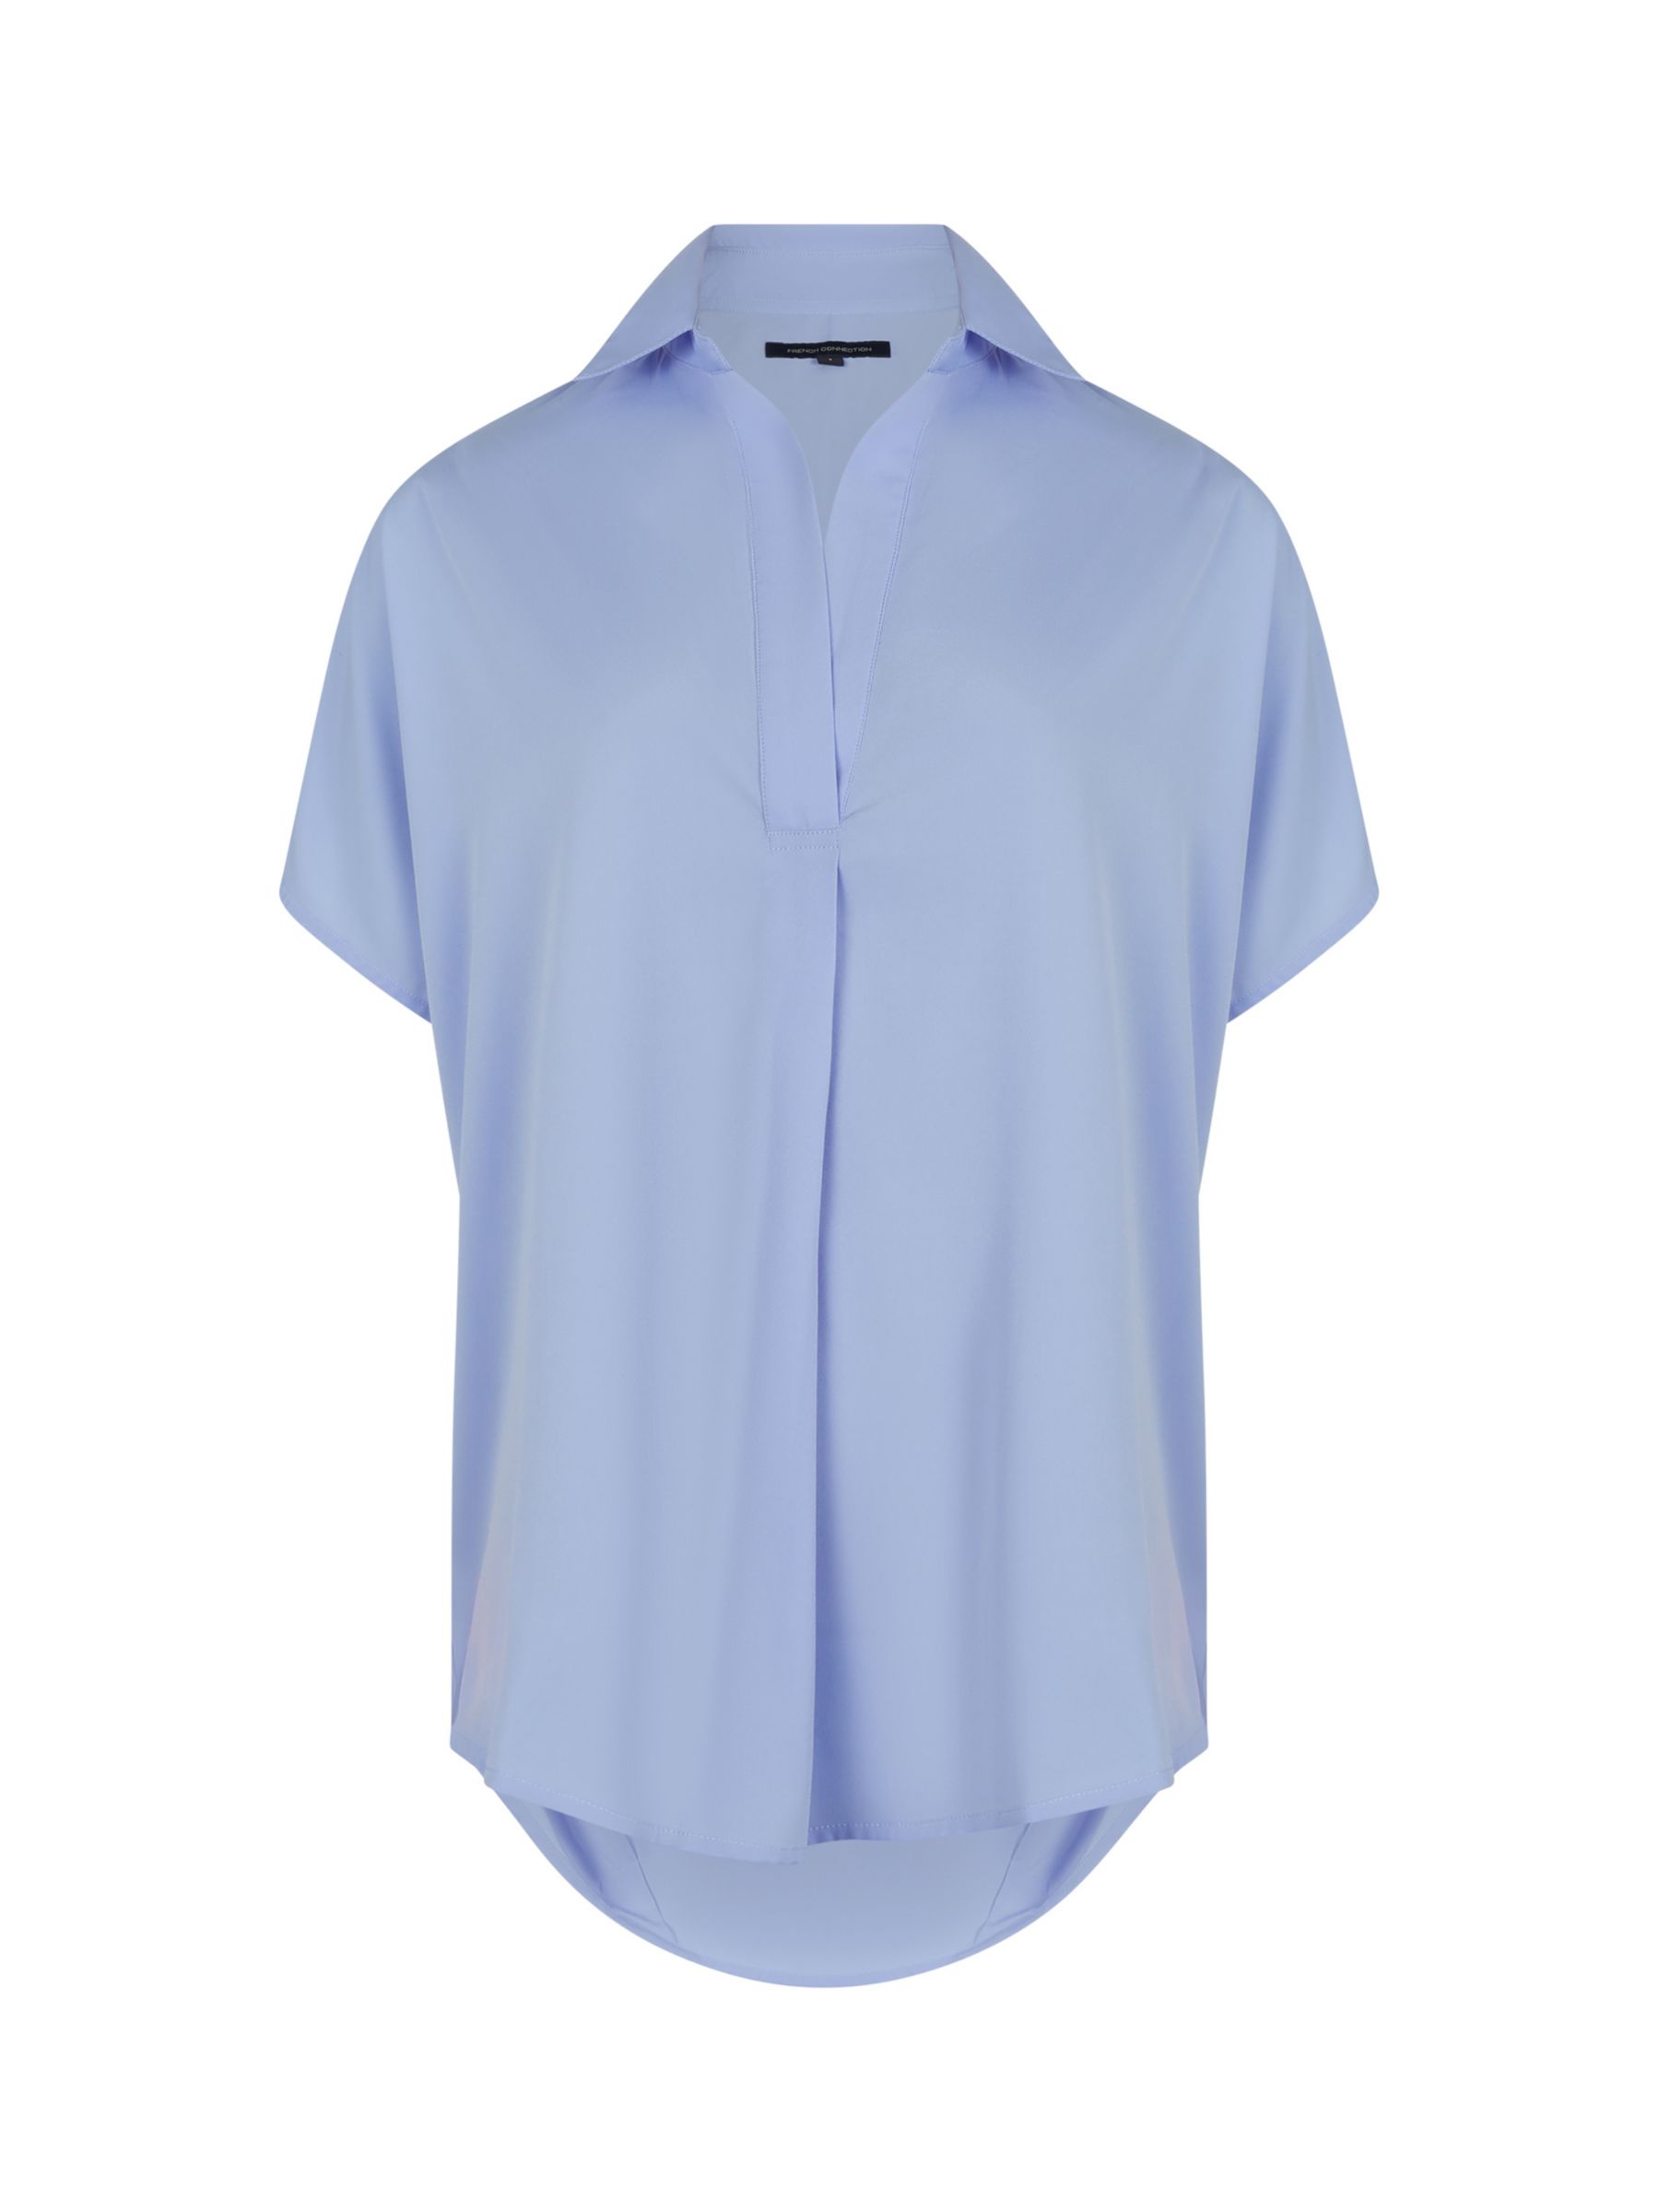 French Connection Short Sleeve Light Crepe Blouse, Bluebell, S